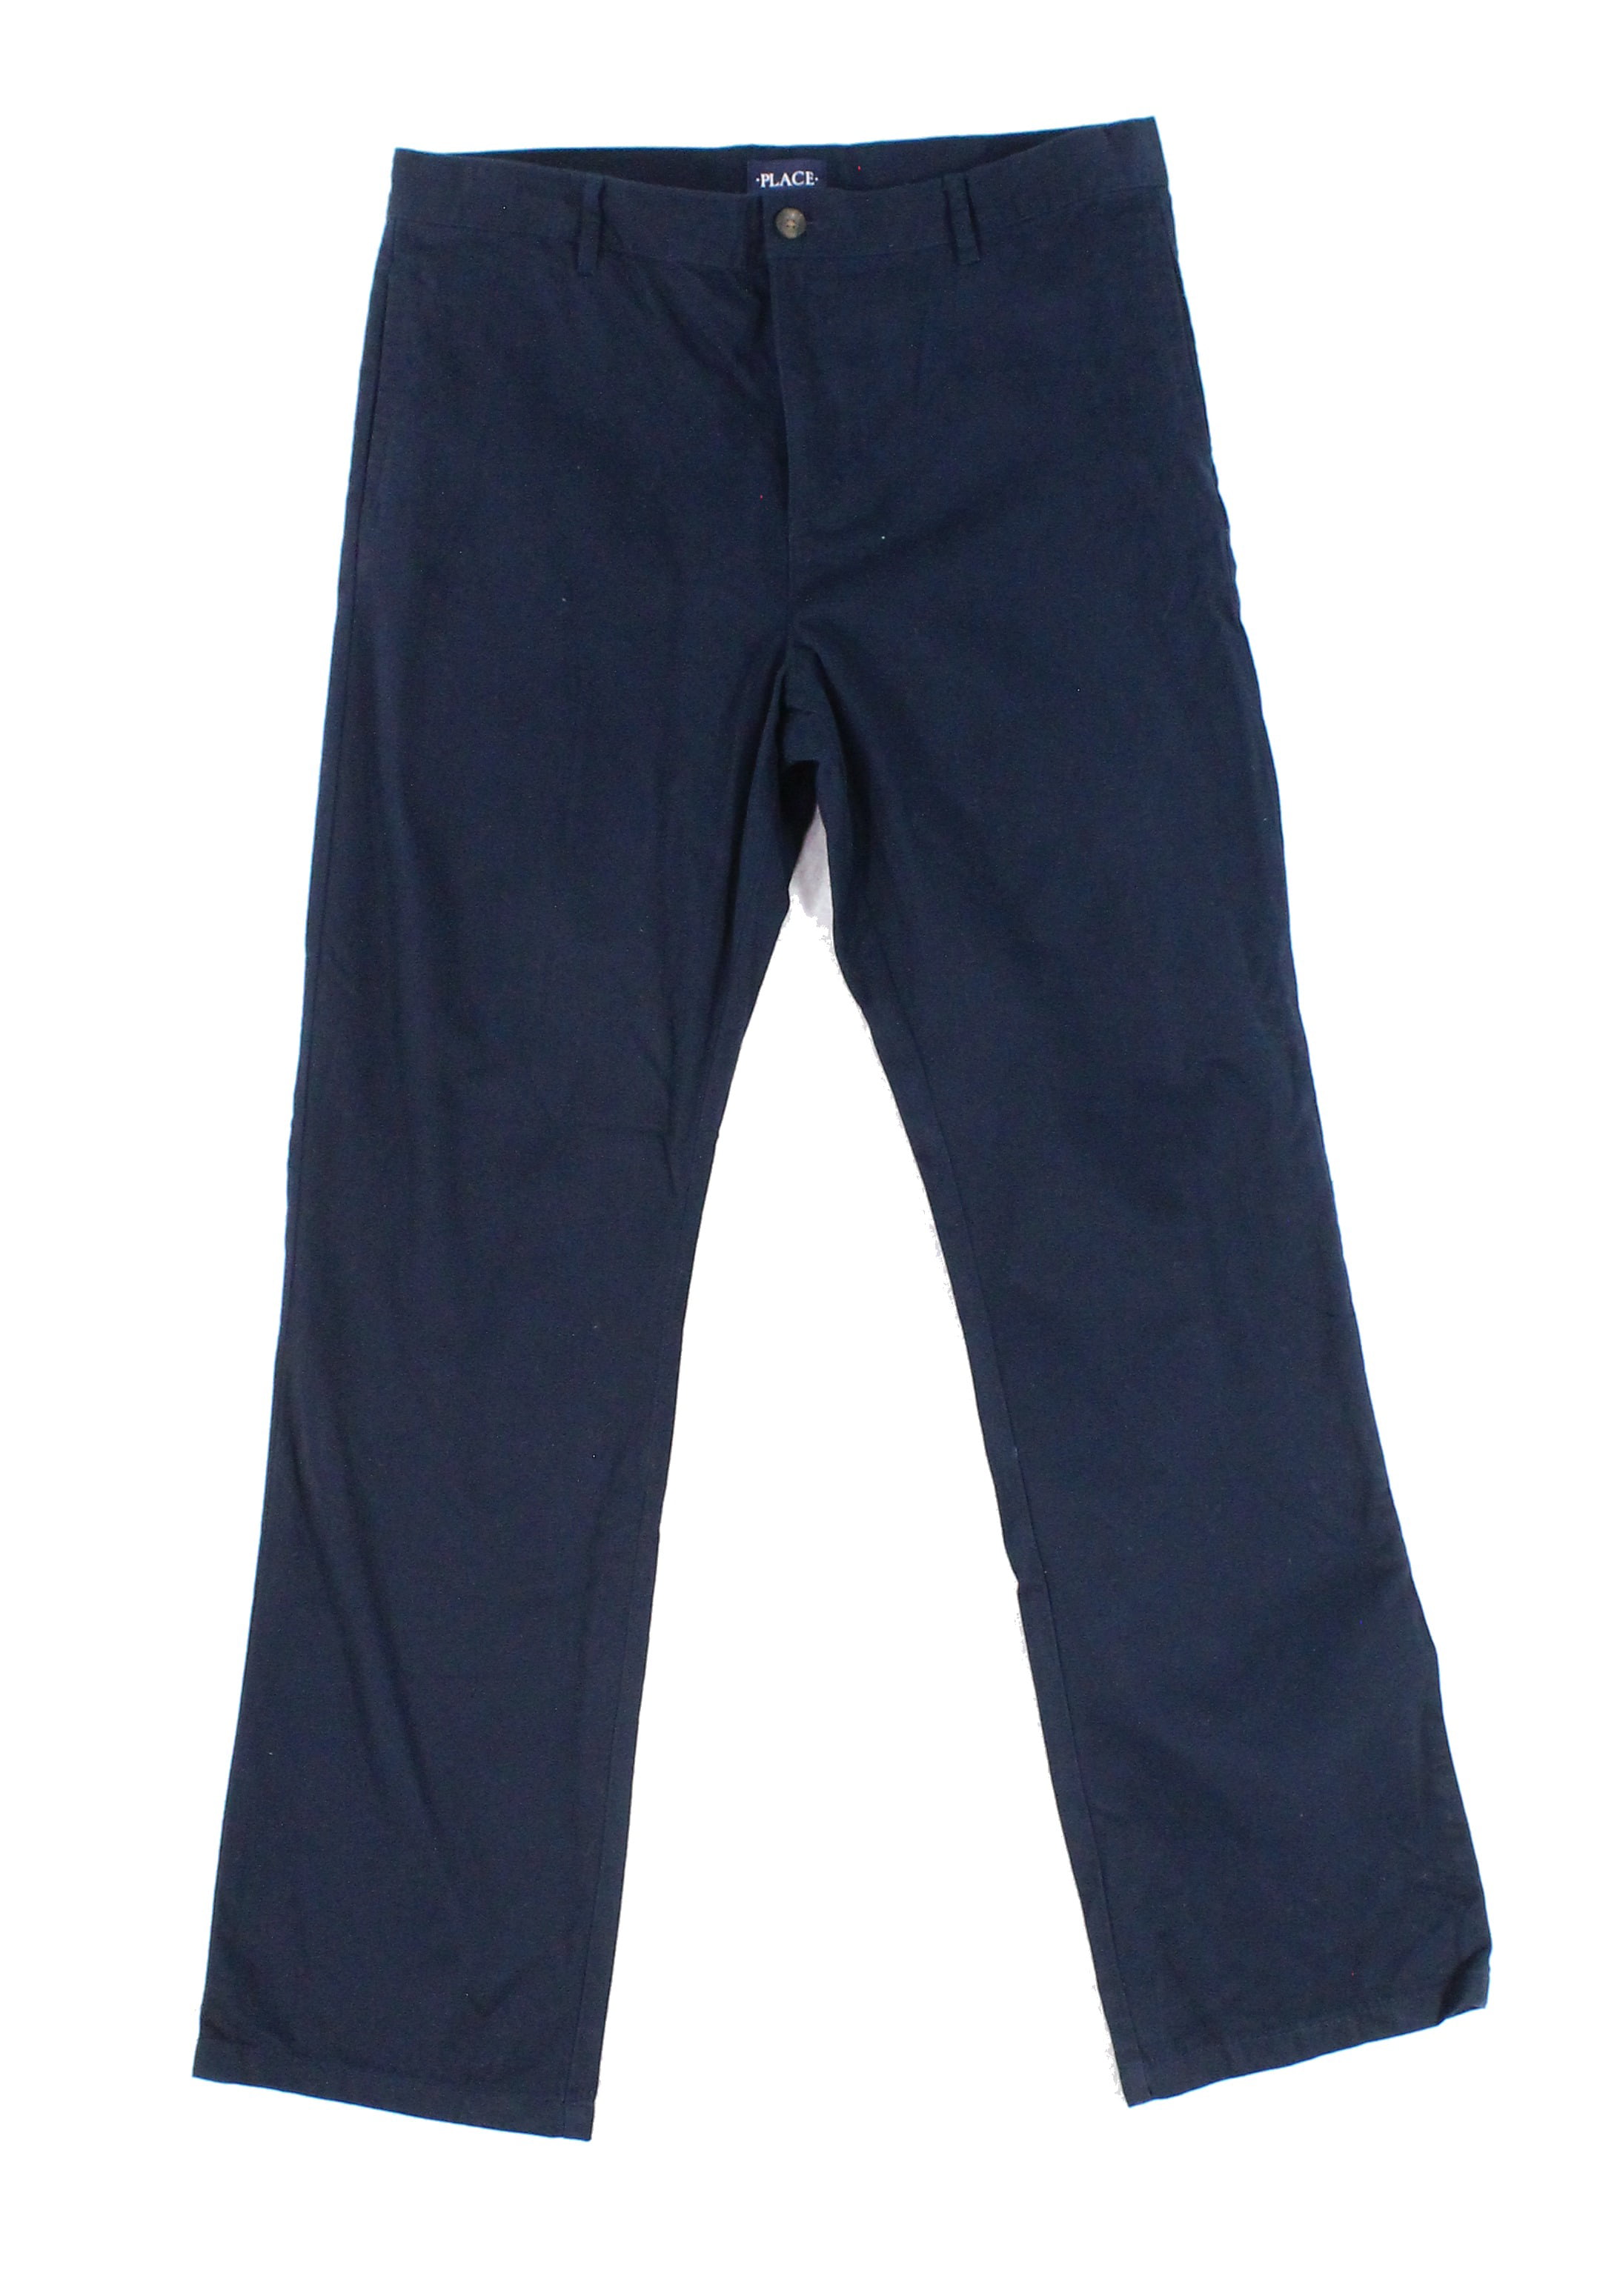 New W/Tags Details about   Boys Husky Chaps School Uniform Pleated Twill Pants Cement Color 